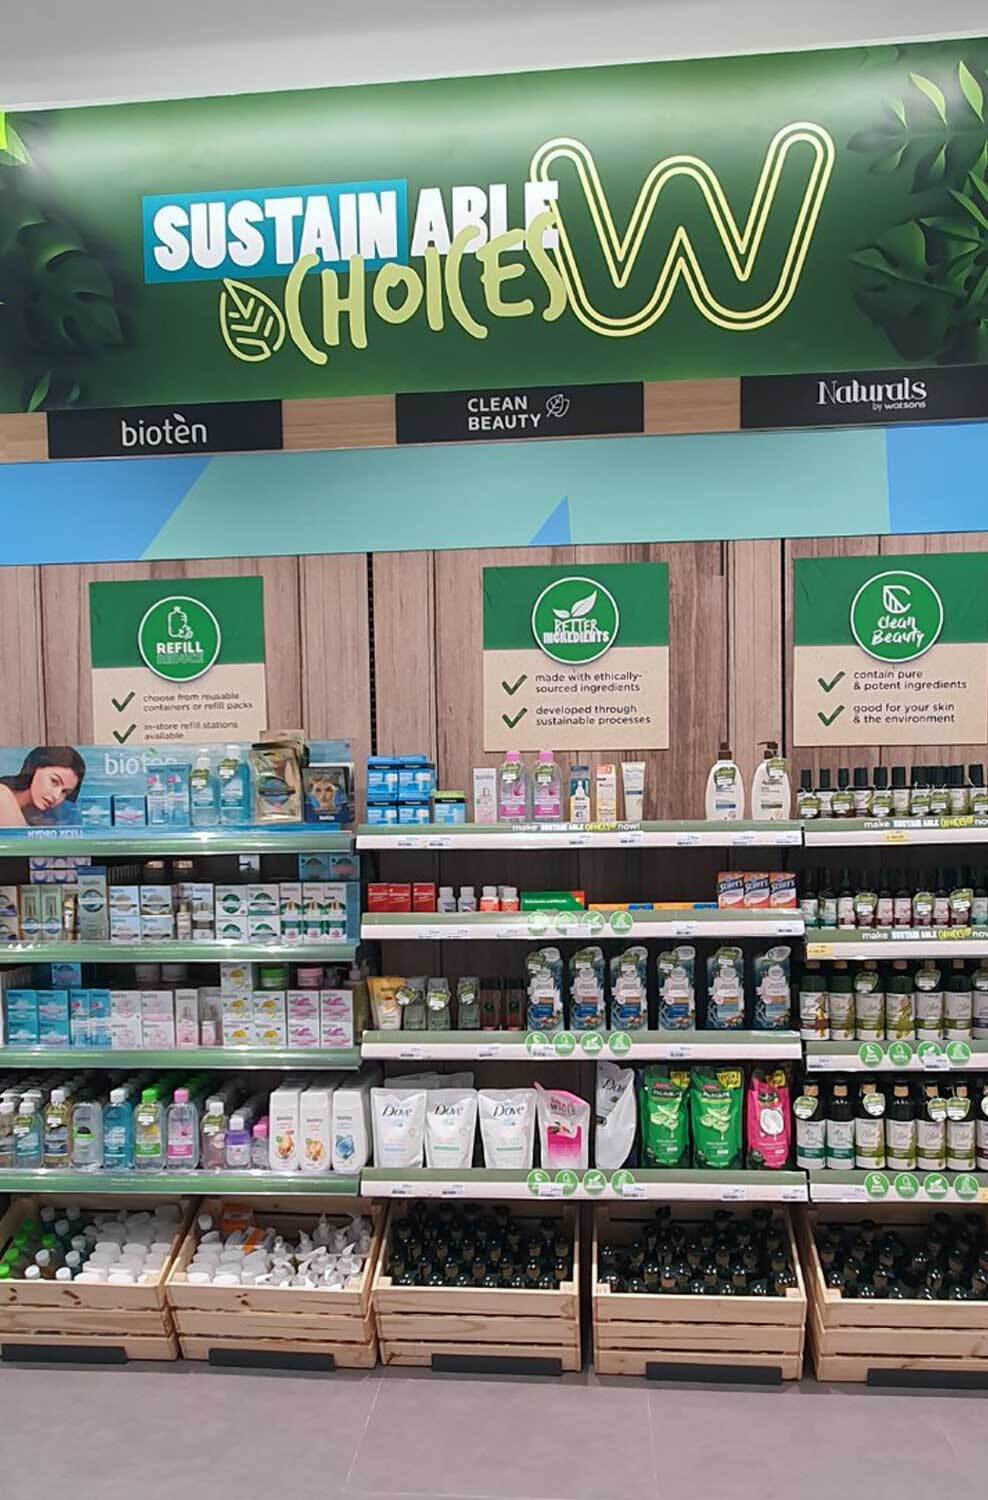 Watsons' Sustainable Choices